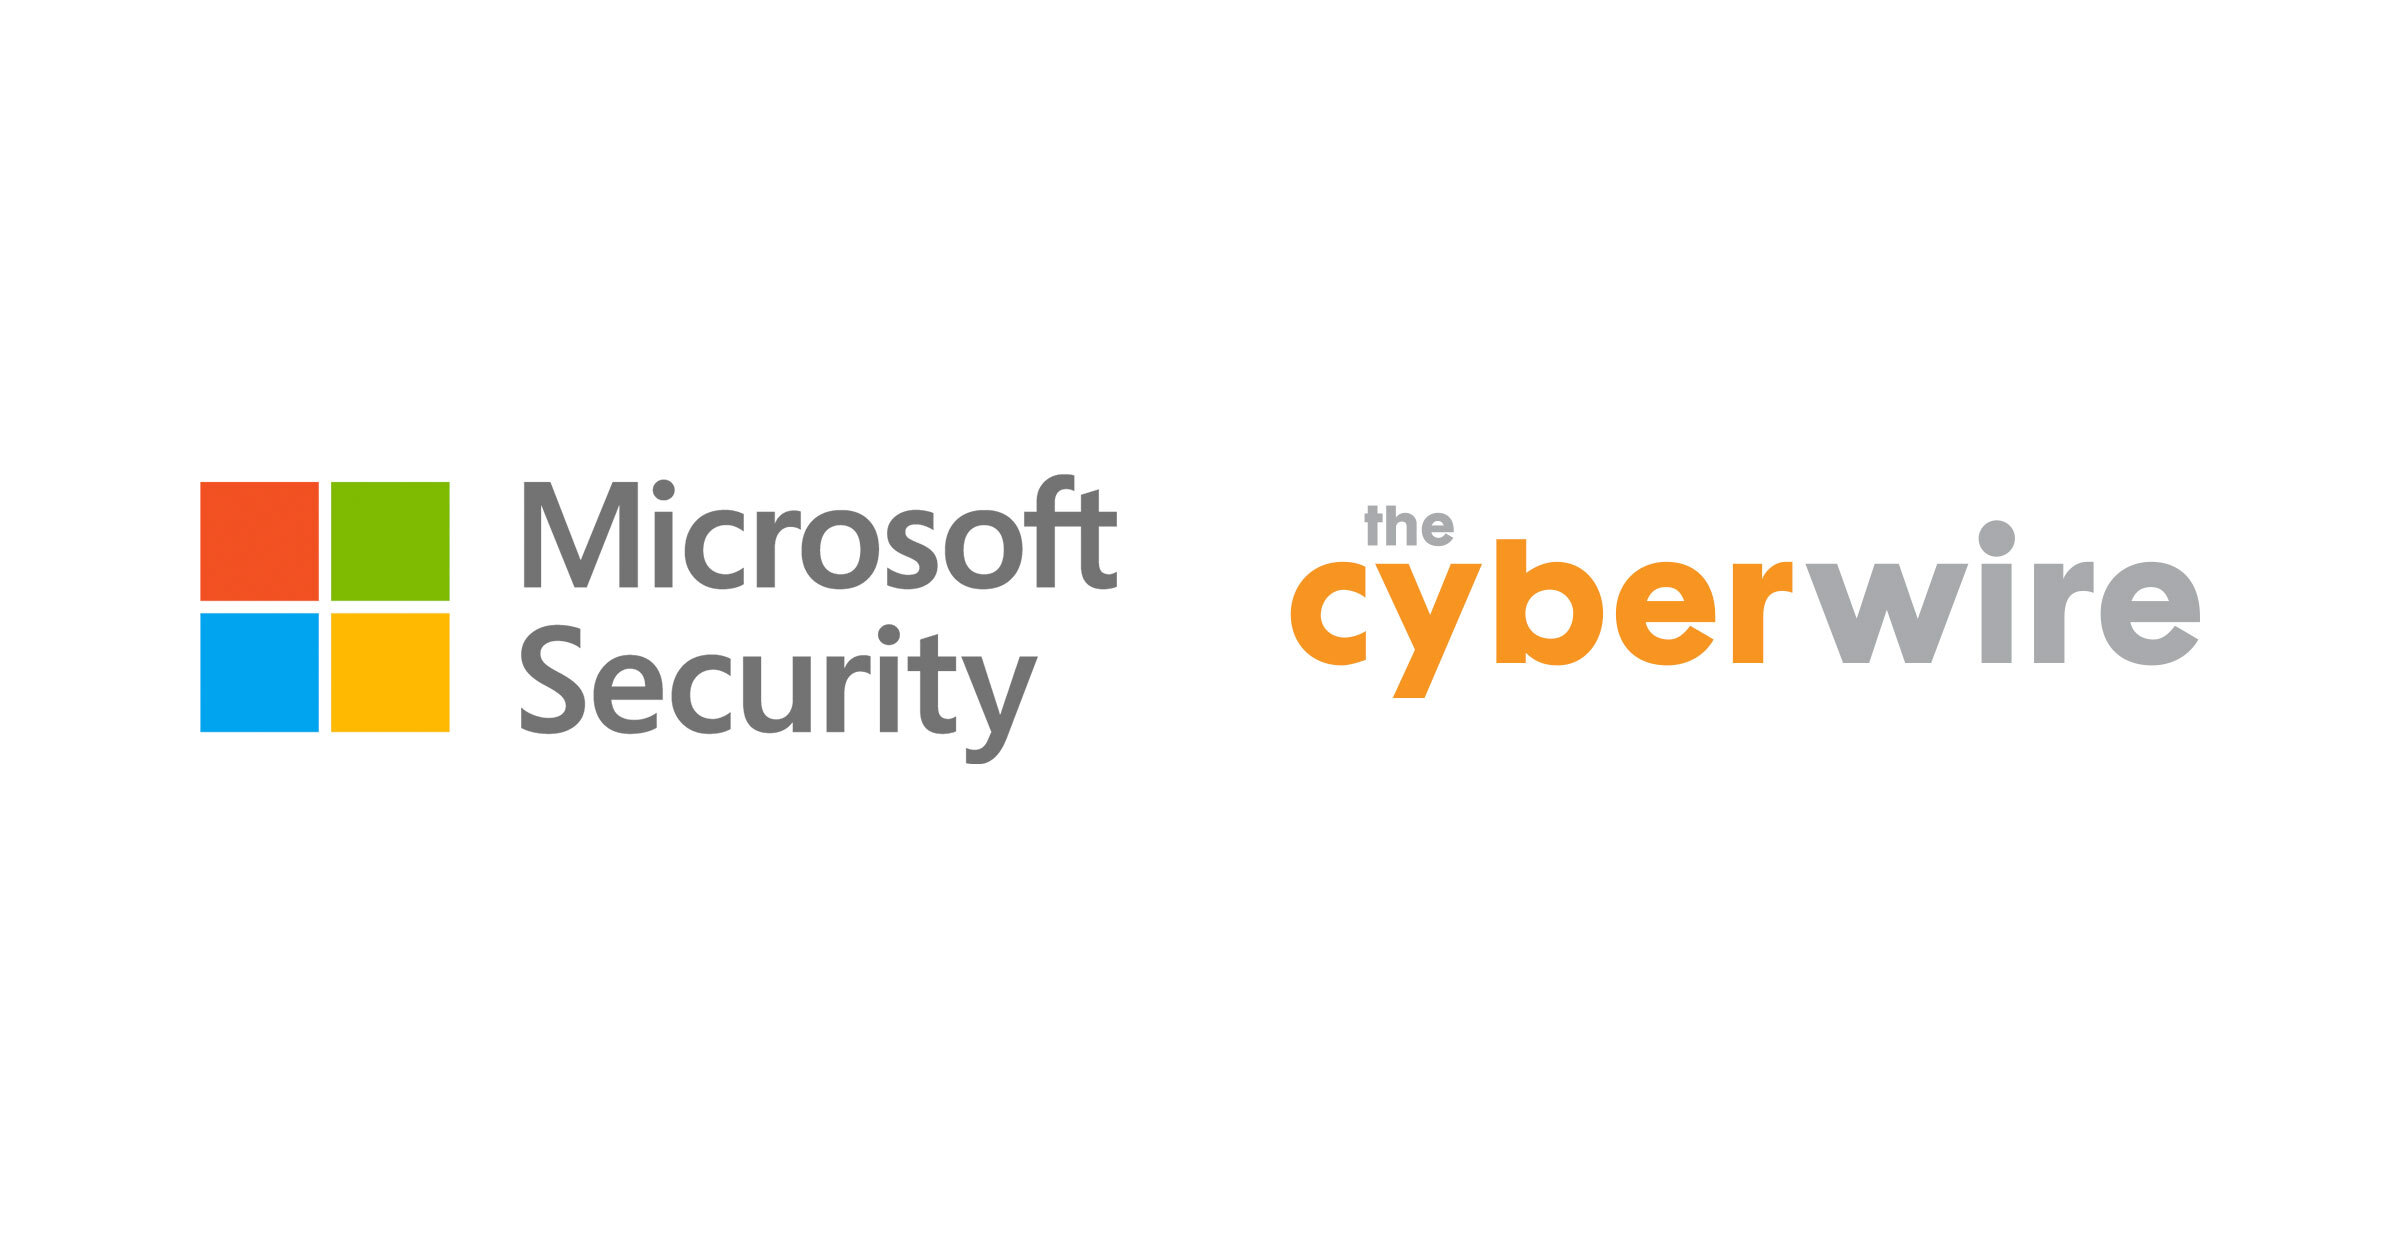 Microsoft Security’s Afternoon Cyber Tea Podcast with Ann Johnson joins the CyberWire Network